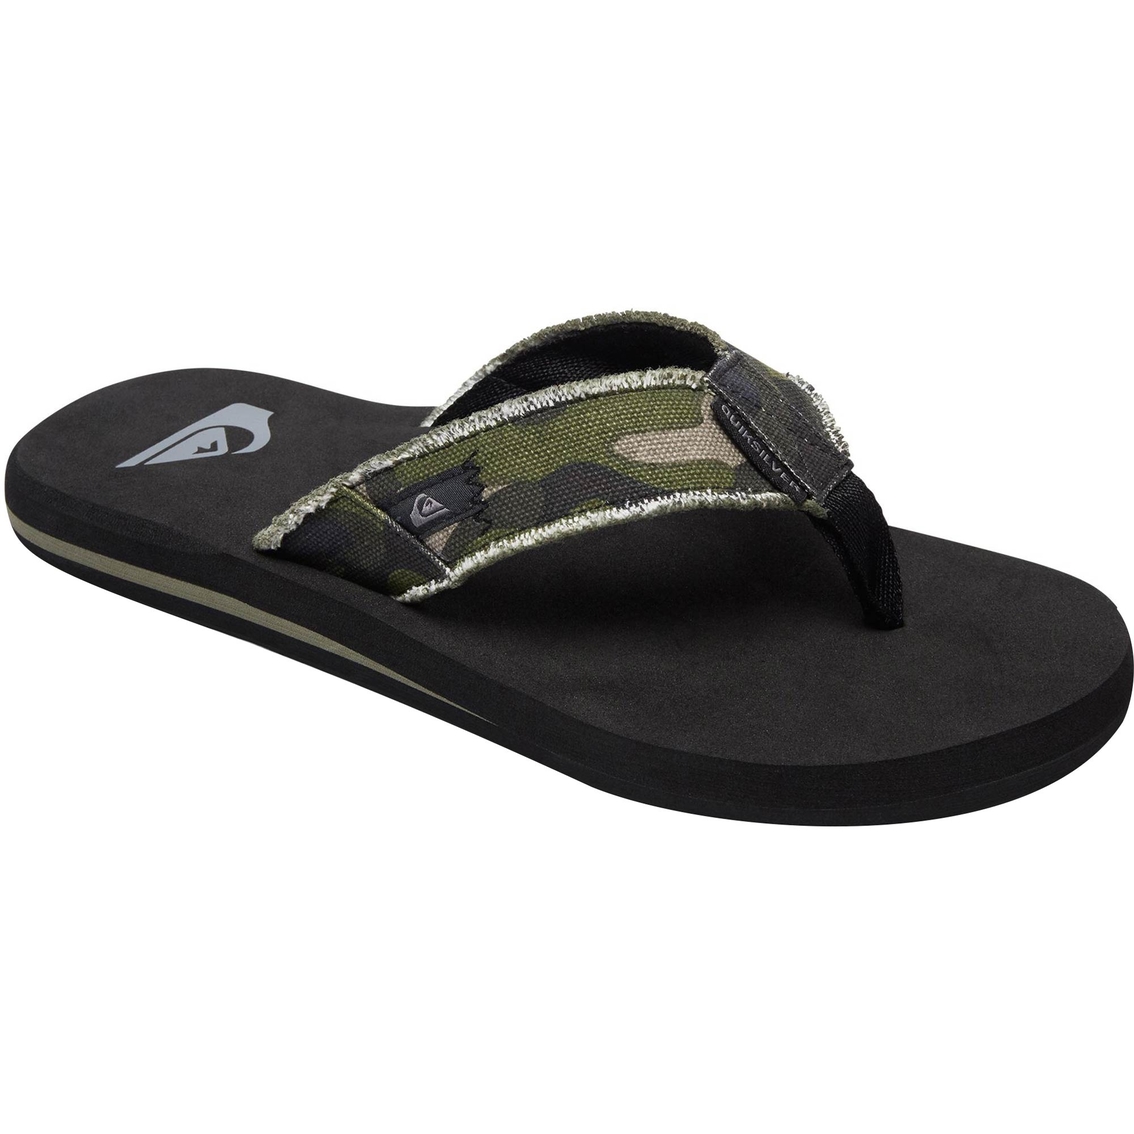 Quiksilver Monkey Abyss Sandals - Image 2 of 4